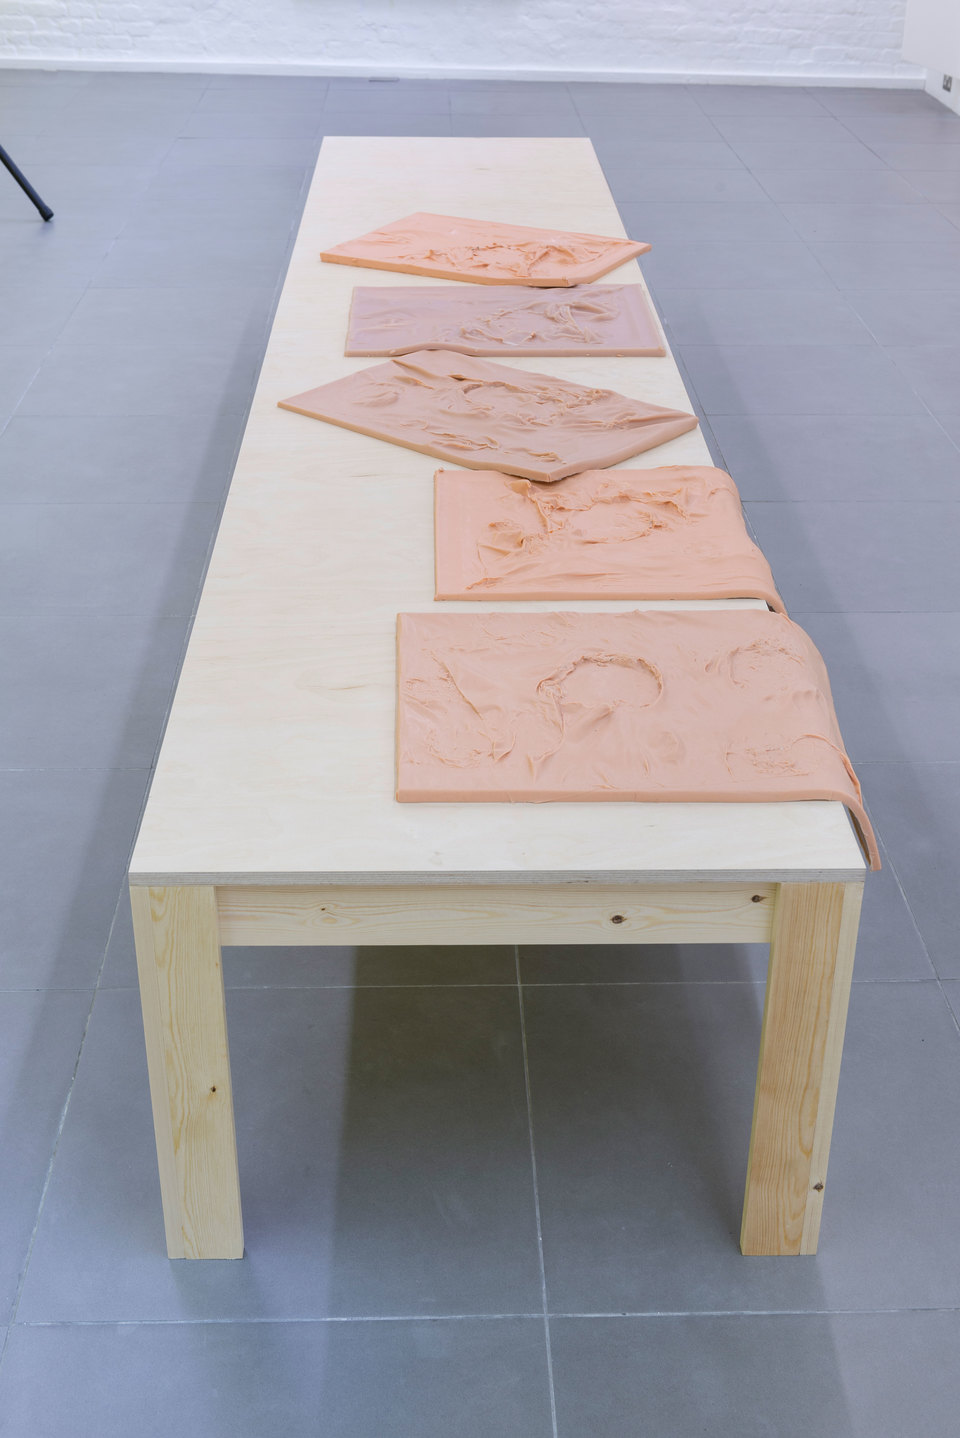 Nikolas Gambaroff, Untitled, 2013, Wooden table with 5 cast silicon works, Table: 77 cm x 381 cm x 55 cm, each silicon work: 61 cm x 46 cm x 3 cm, Cell Project Space